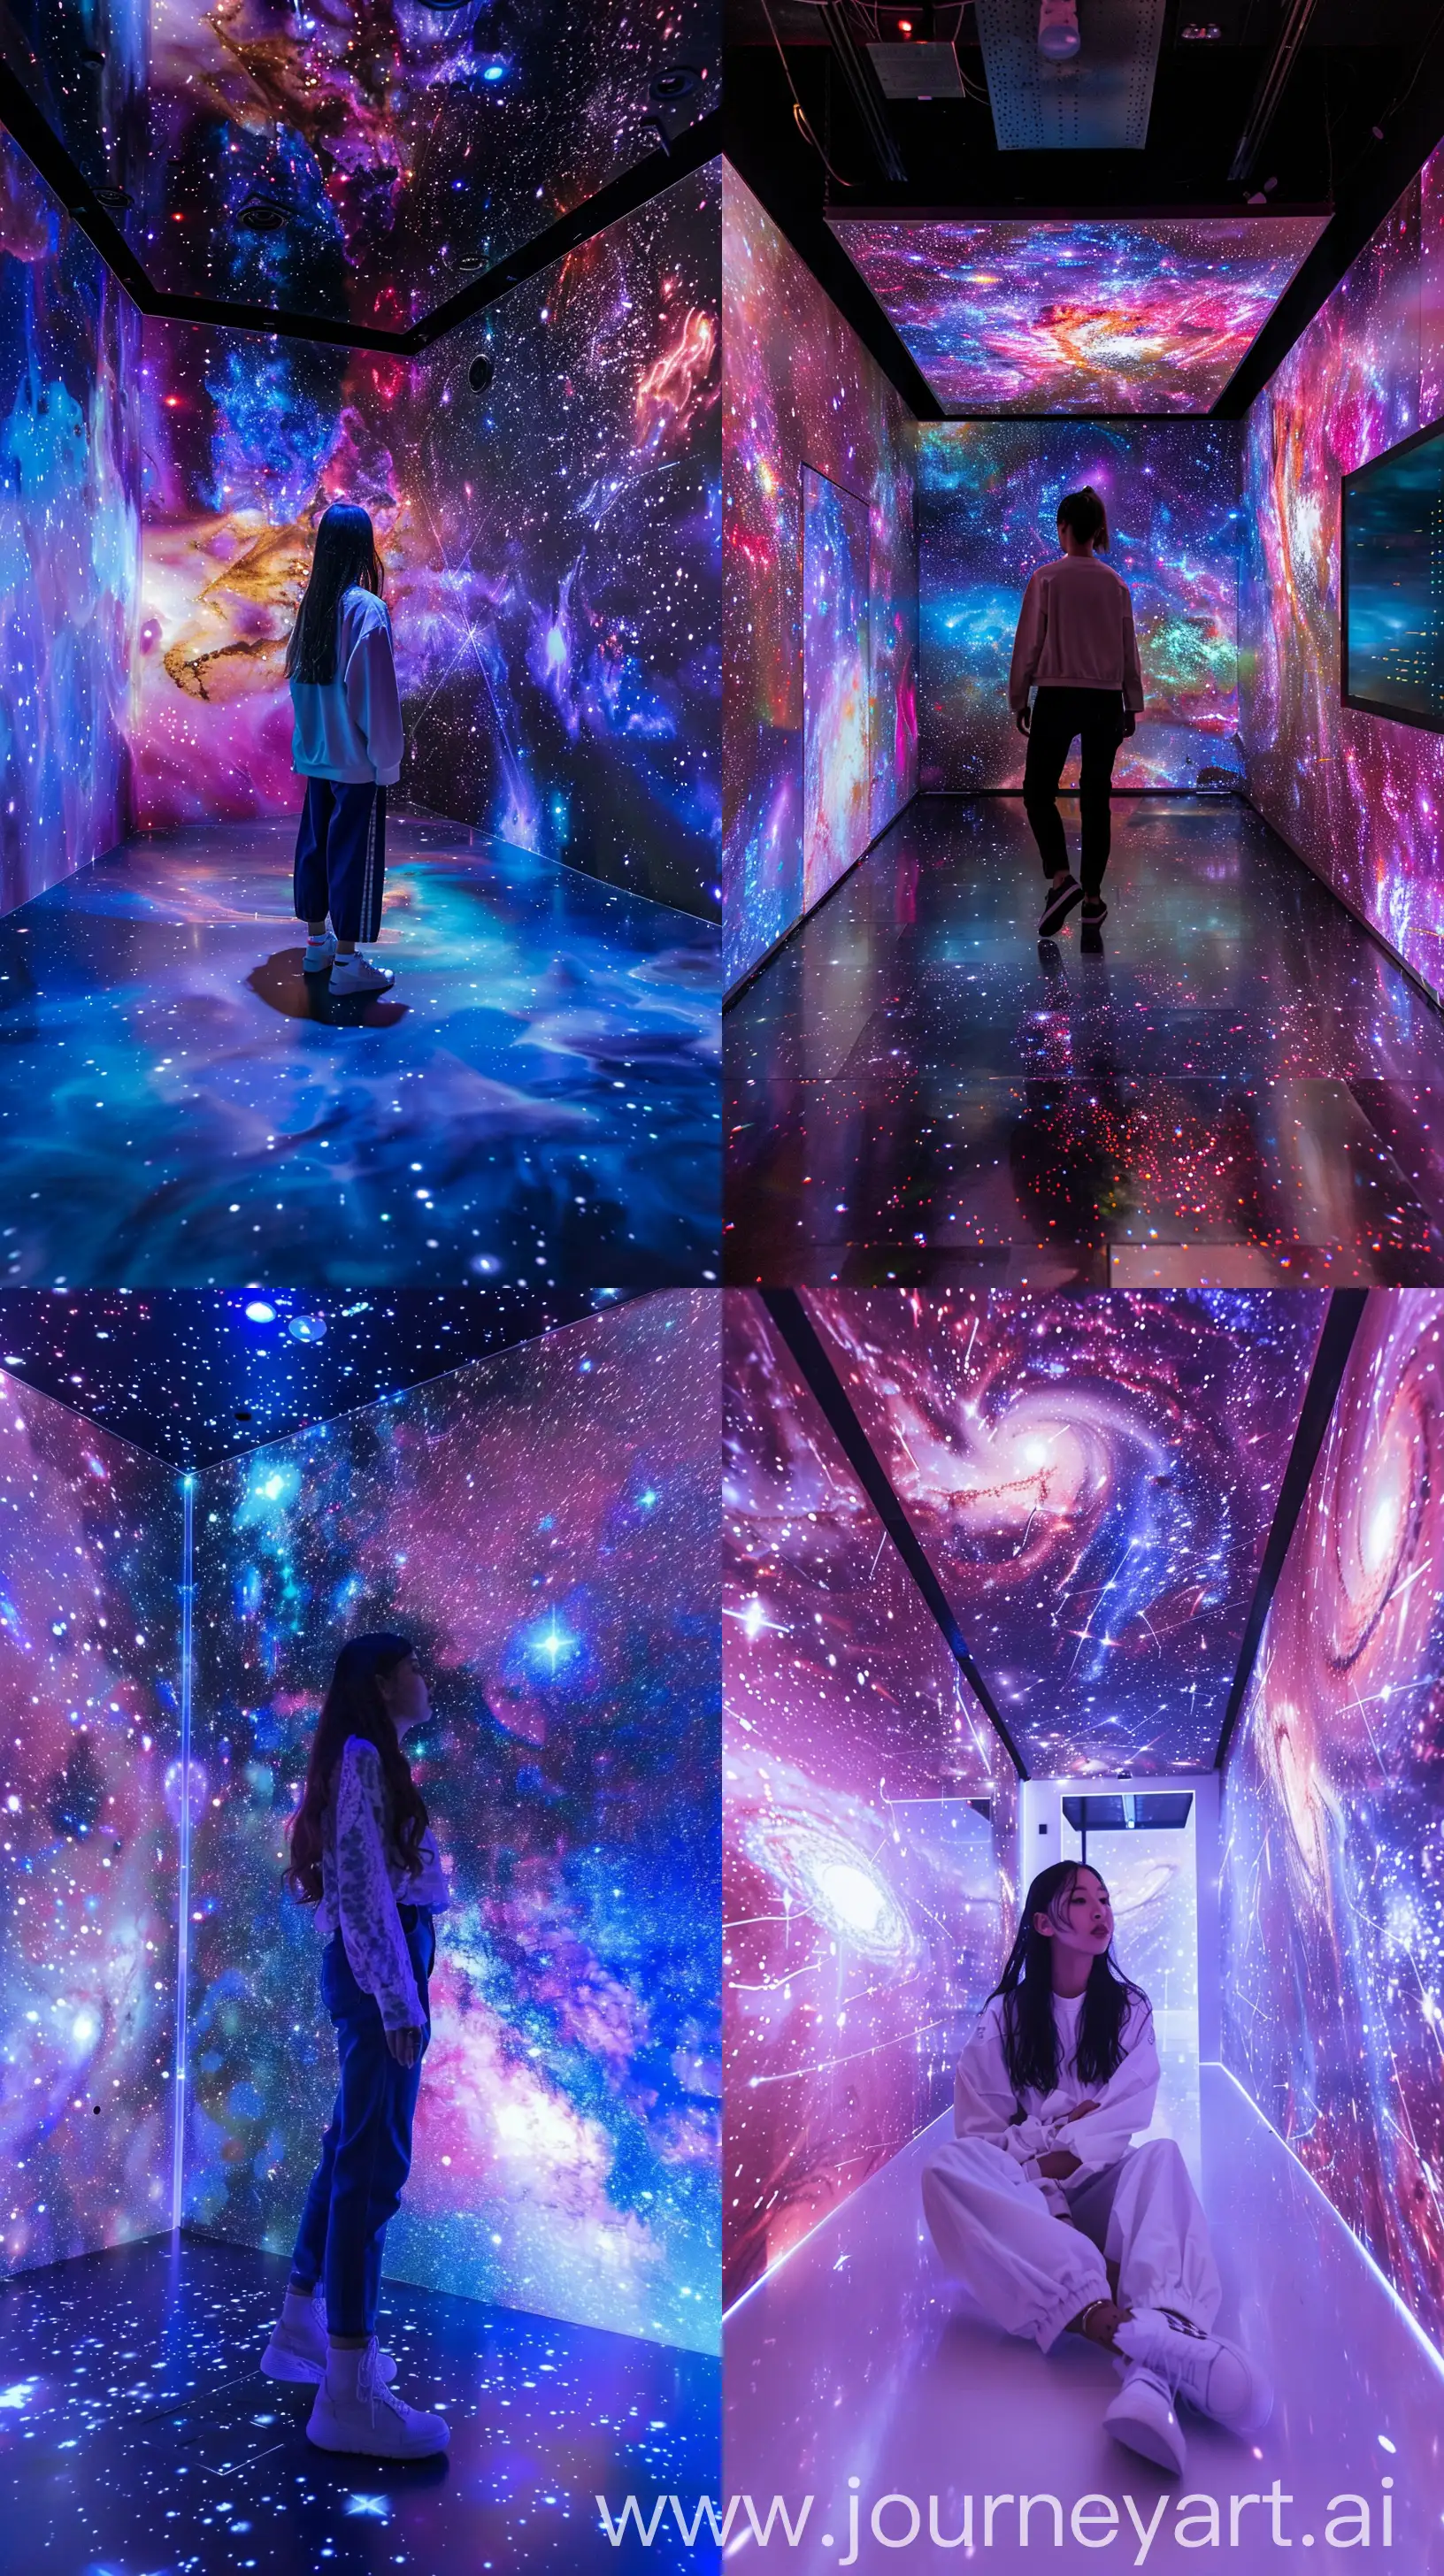 an immersive space in a physical exhibition, where i as a visitor have the feeling i am floating in the middle of space, the universe unfolds around me, blackpink's jennie --ar 9:16